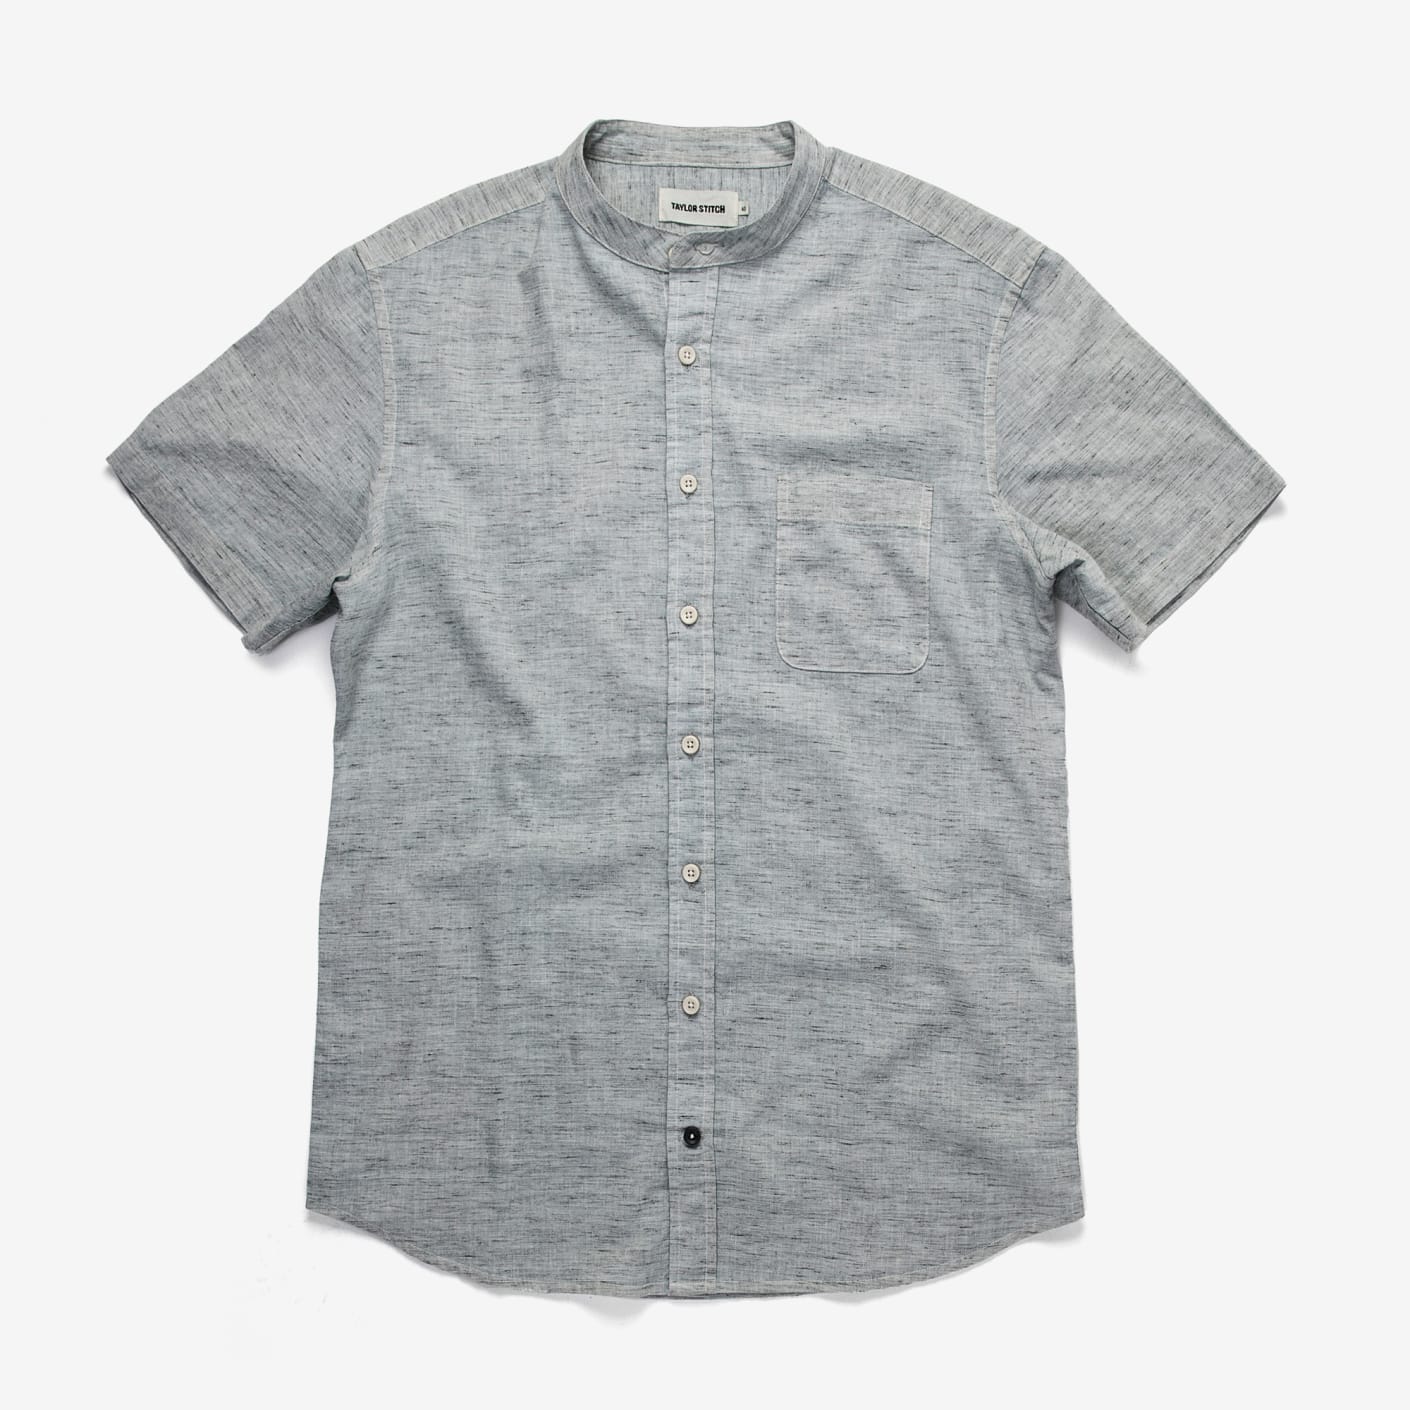 Taylor Stitch, The Short Sleeve Bandit in Heather Grey